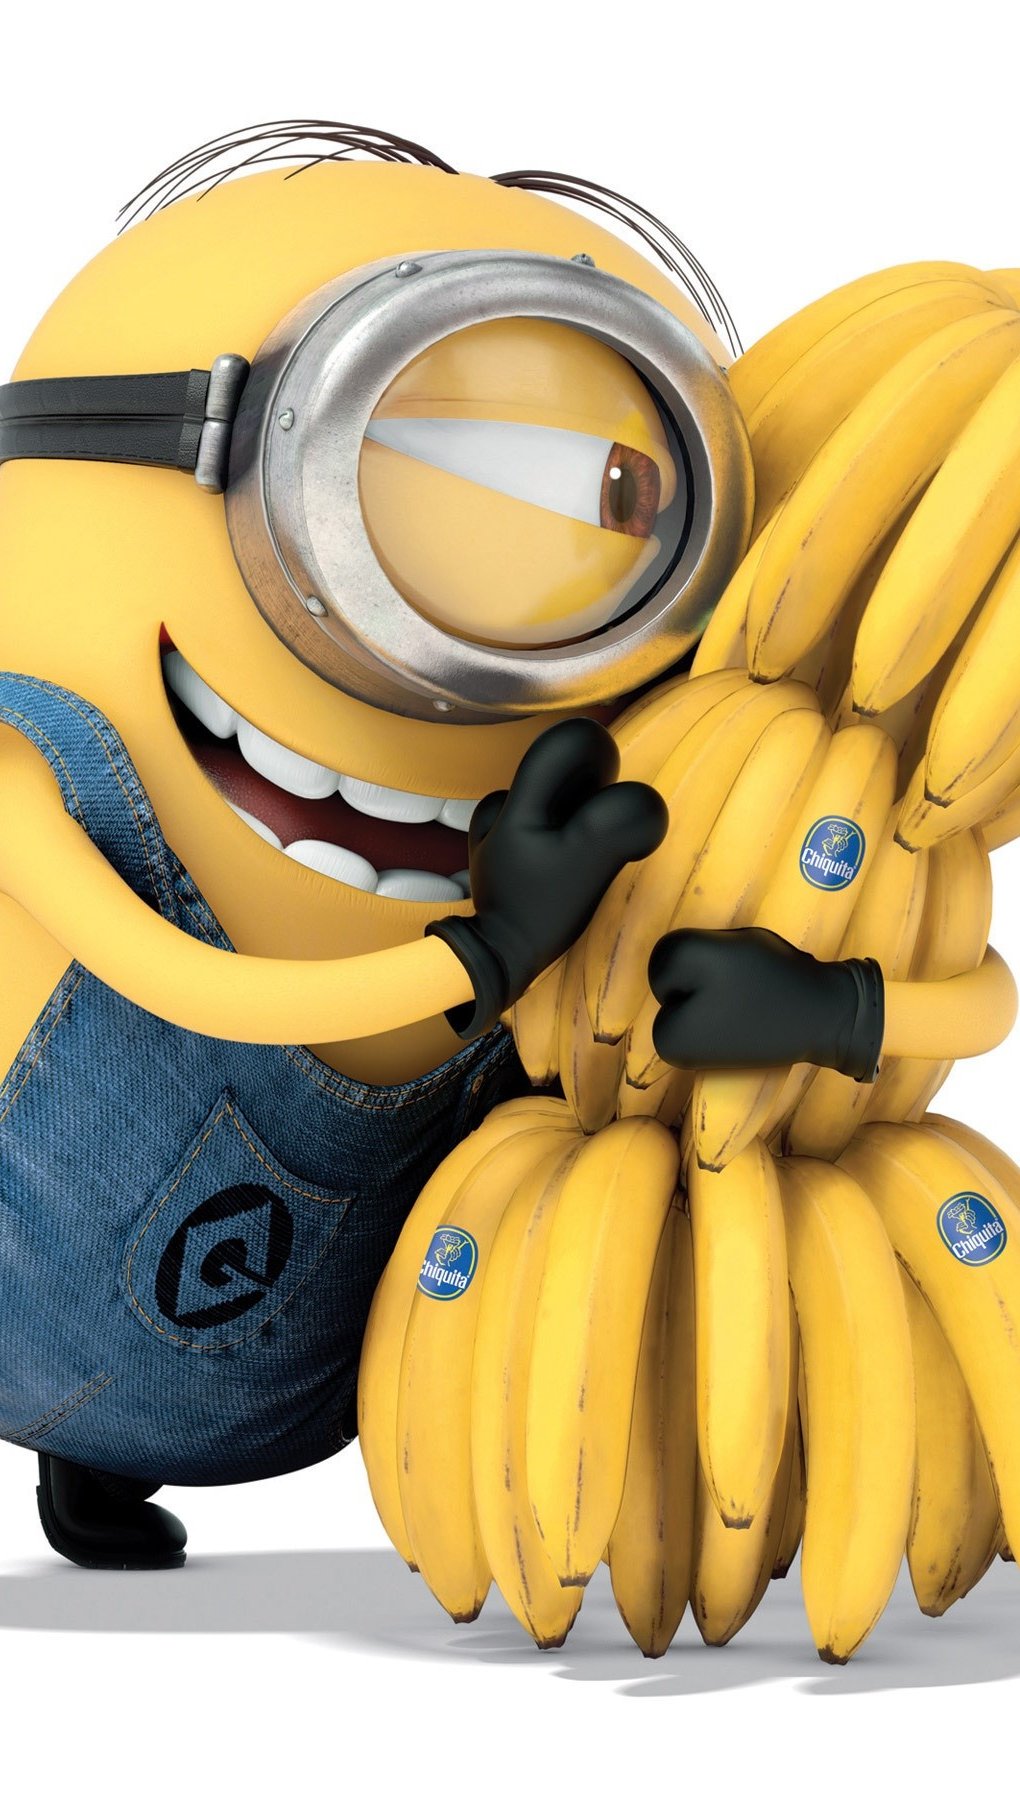 A minion with bananas Wallpaper ID:461